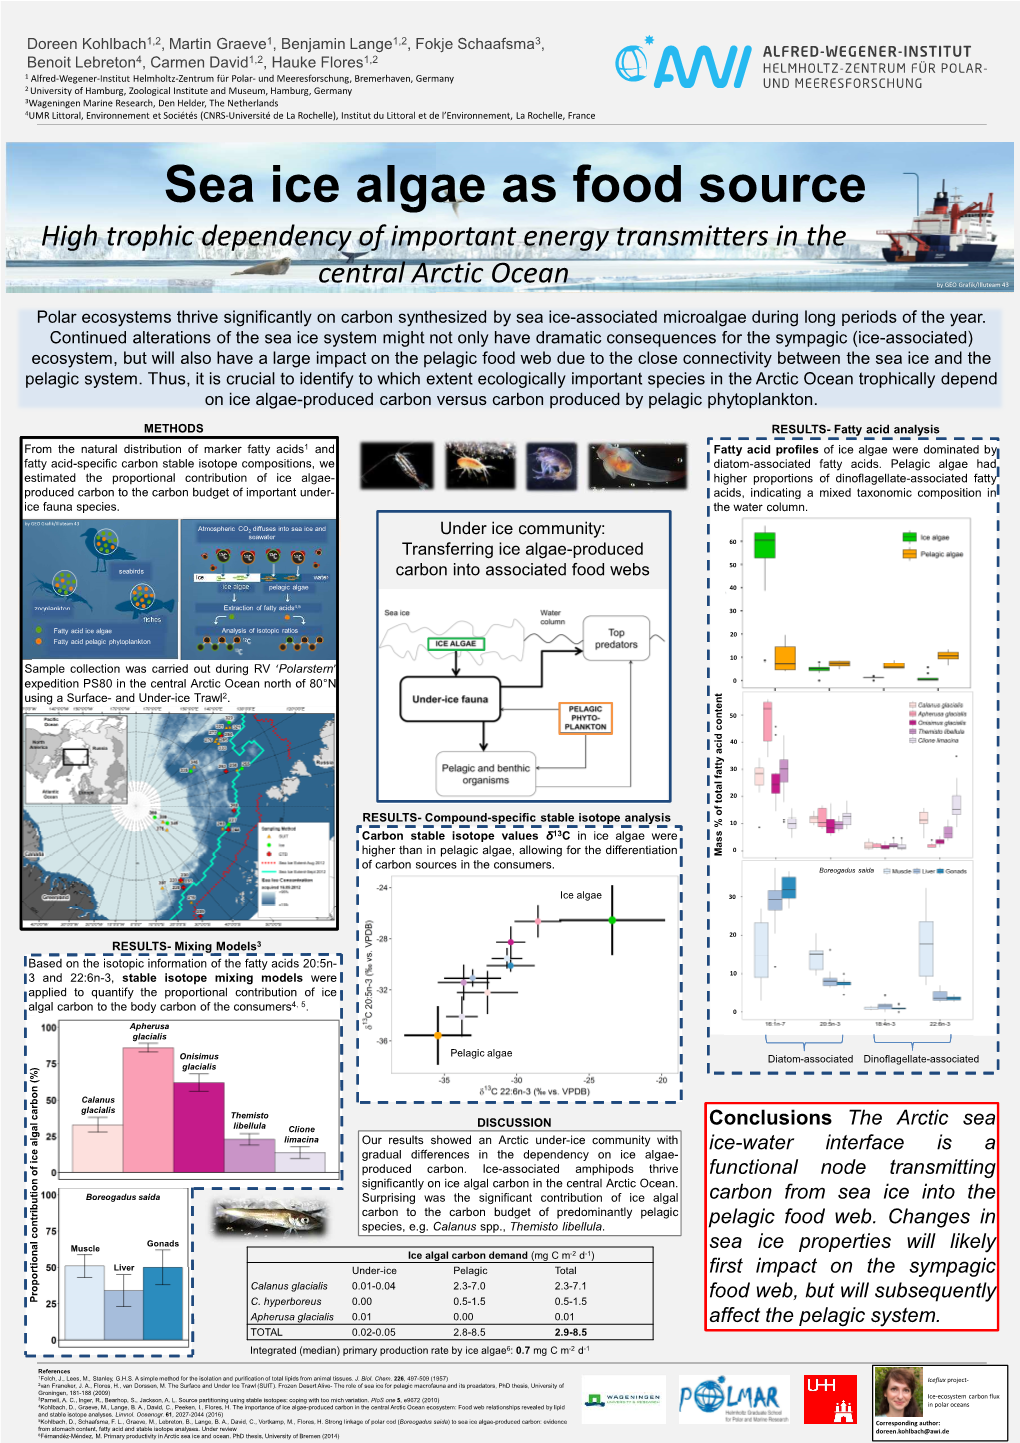 Sea Ice Algae As Food Source High Trophic Dependency of Important Energy Transmitters in the Central Arctic Ocean by GEO Grafik/Illuteam 43